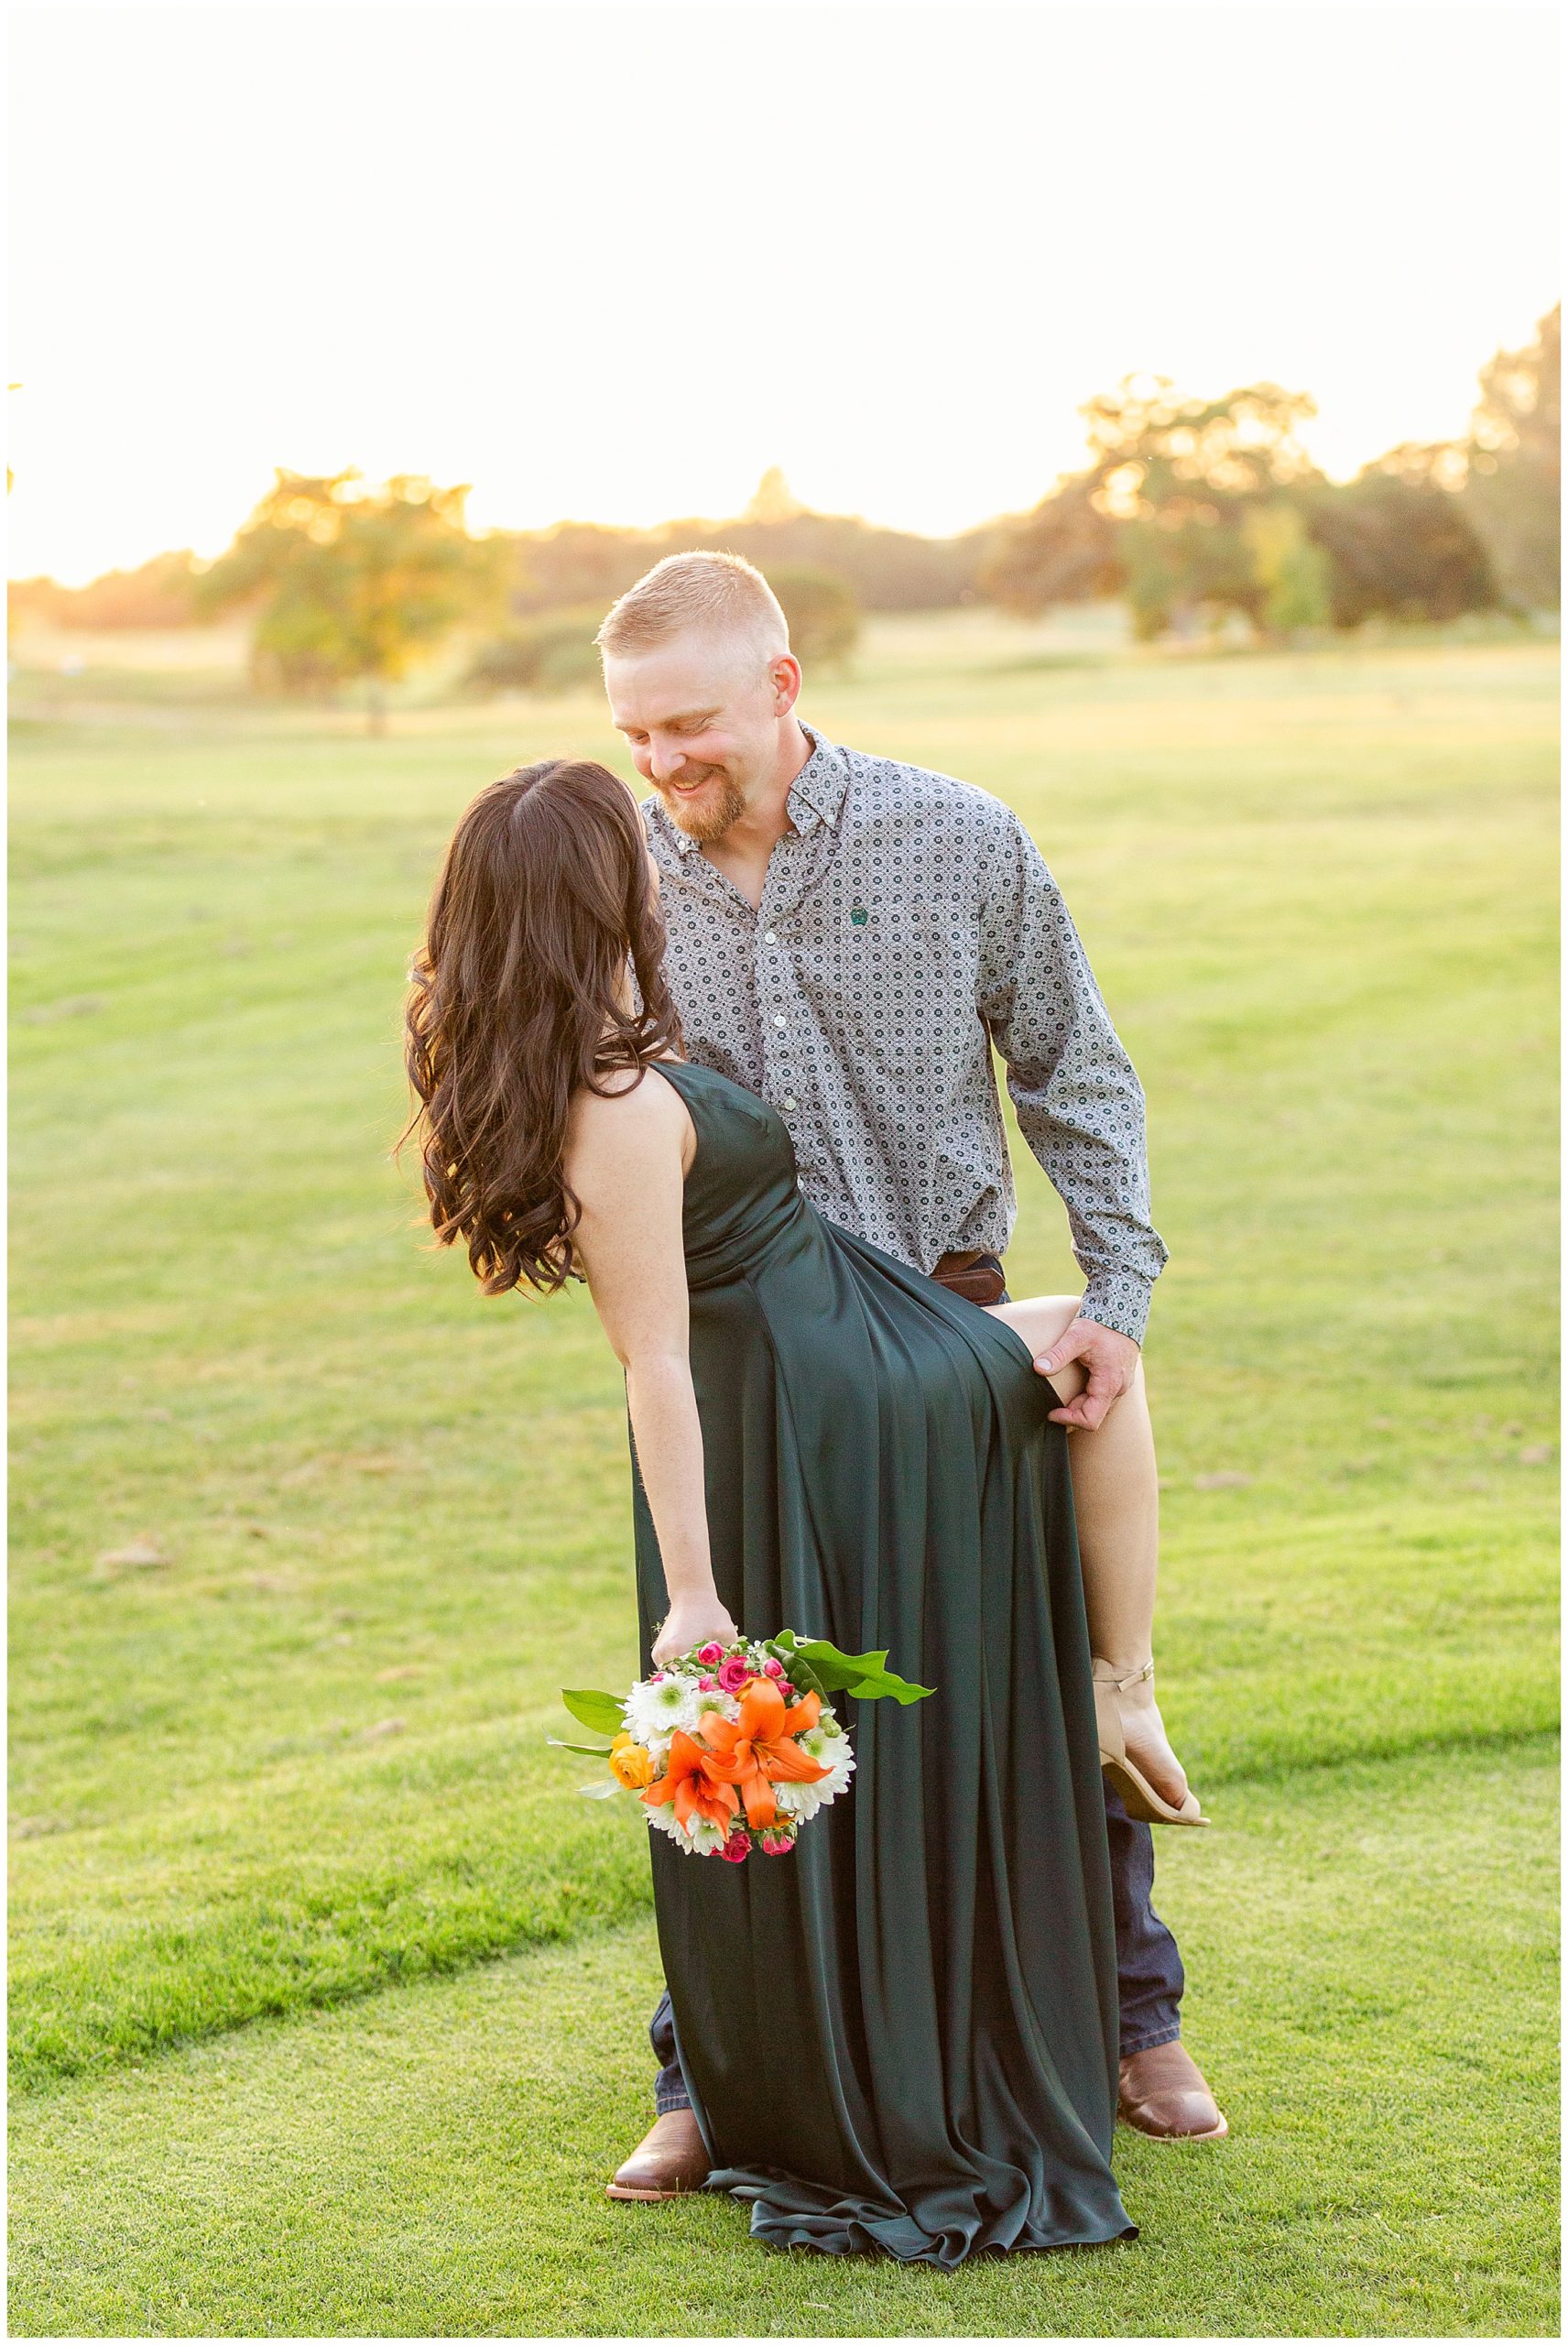 Upper Bidwell Park Engagement Session on Golf Course in Emerald Green Dress | Lizette + Conor